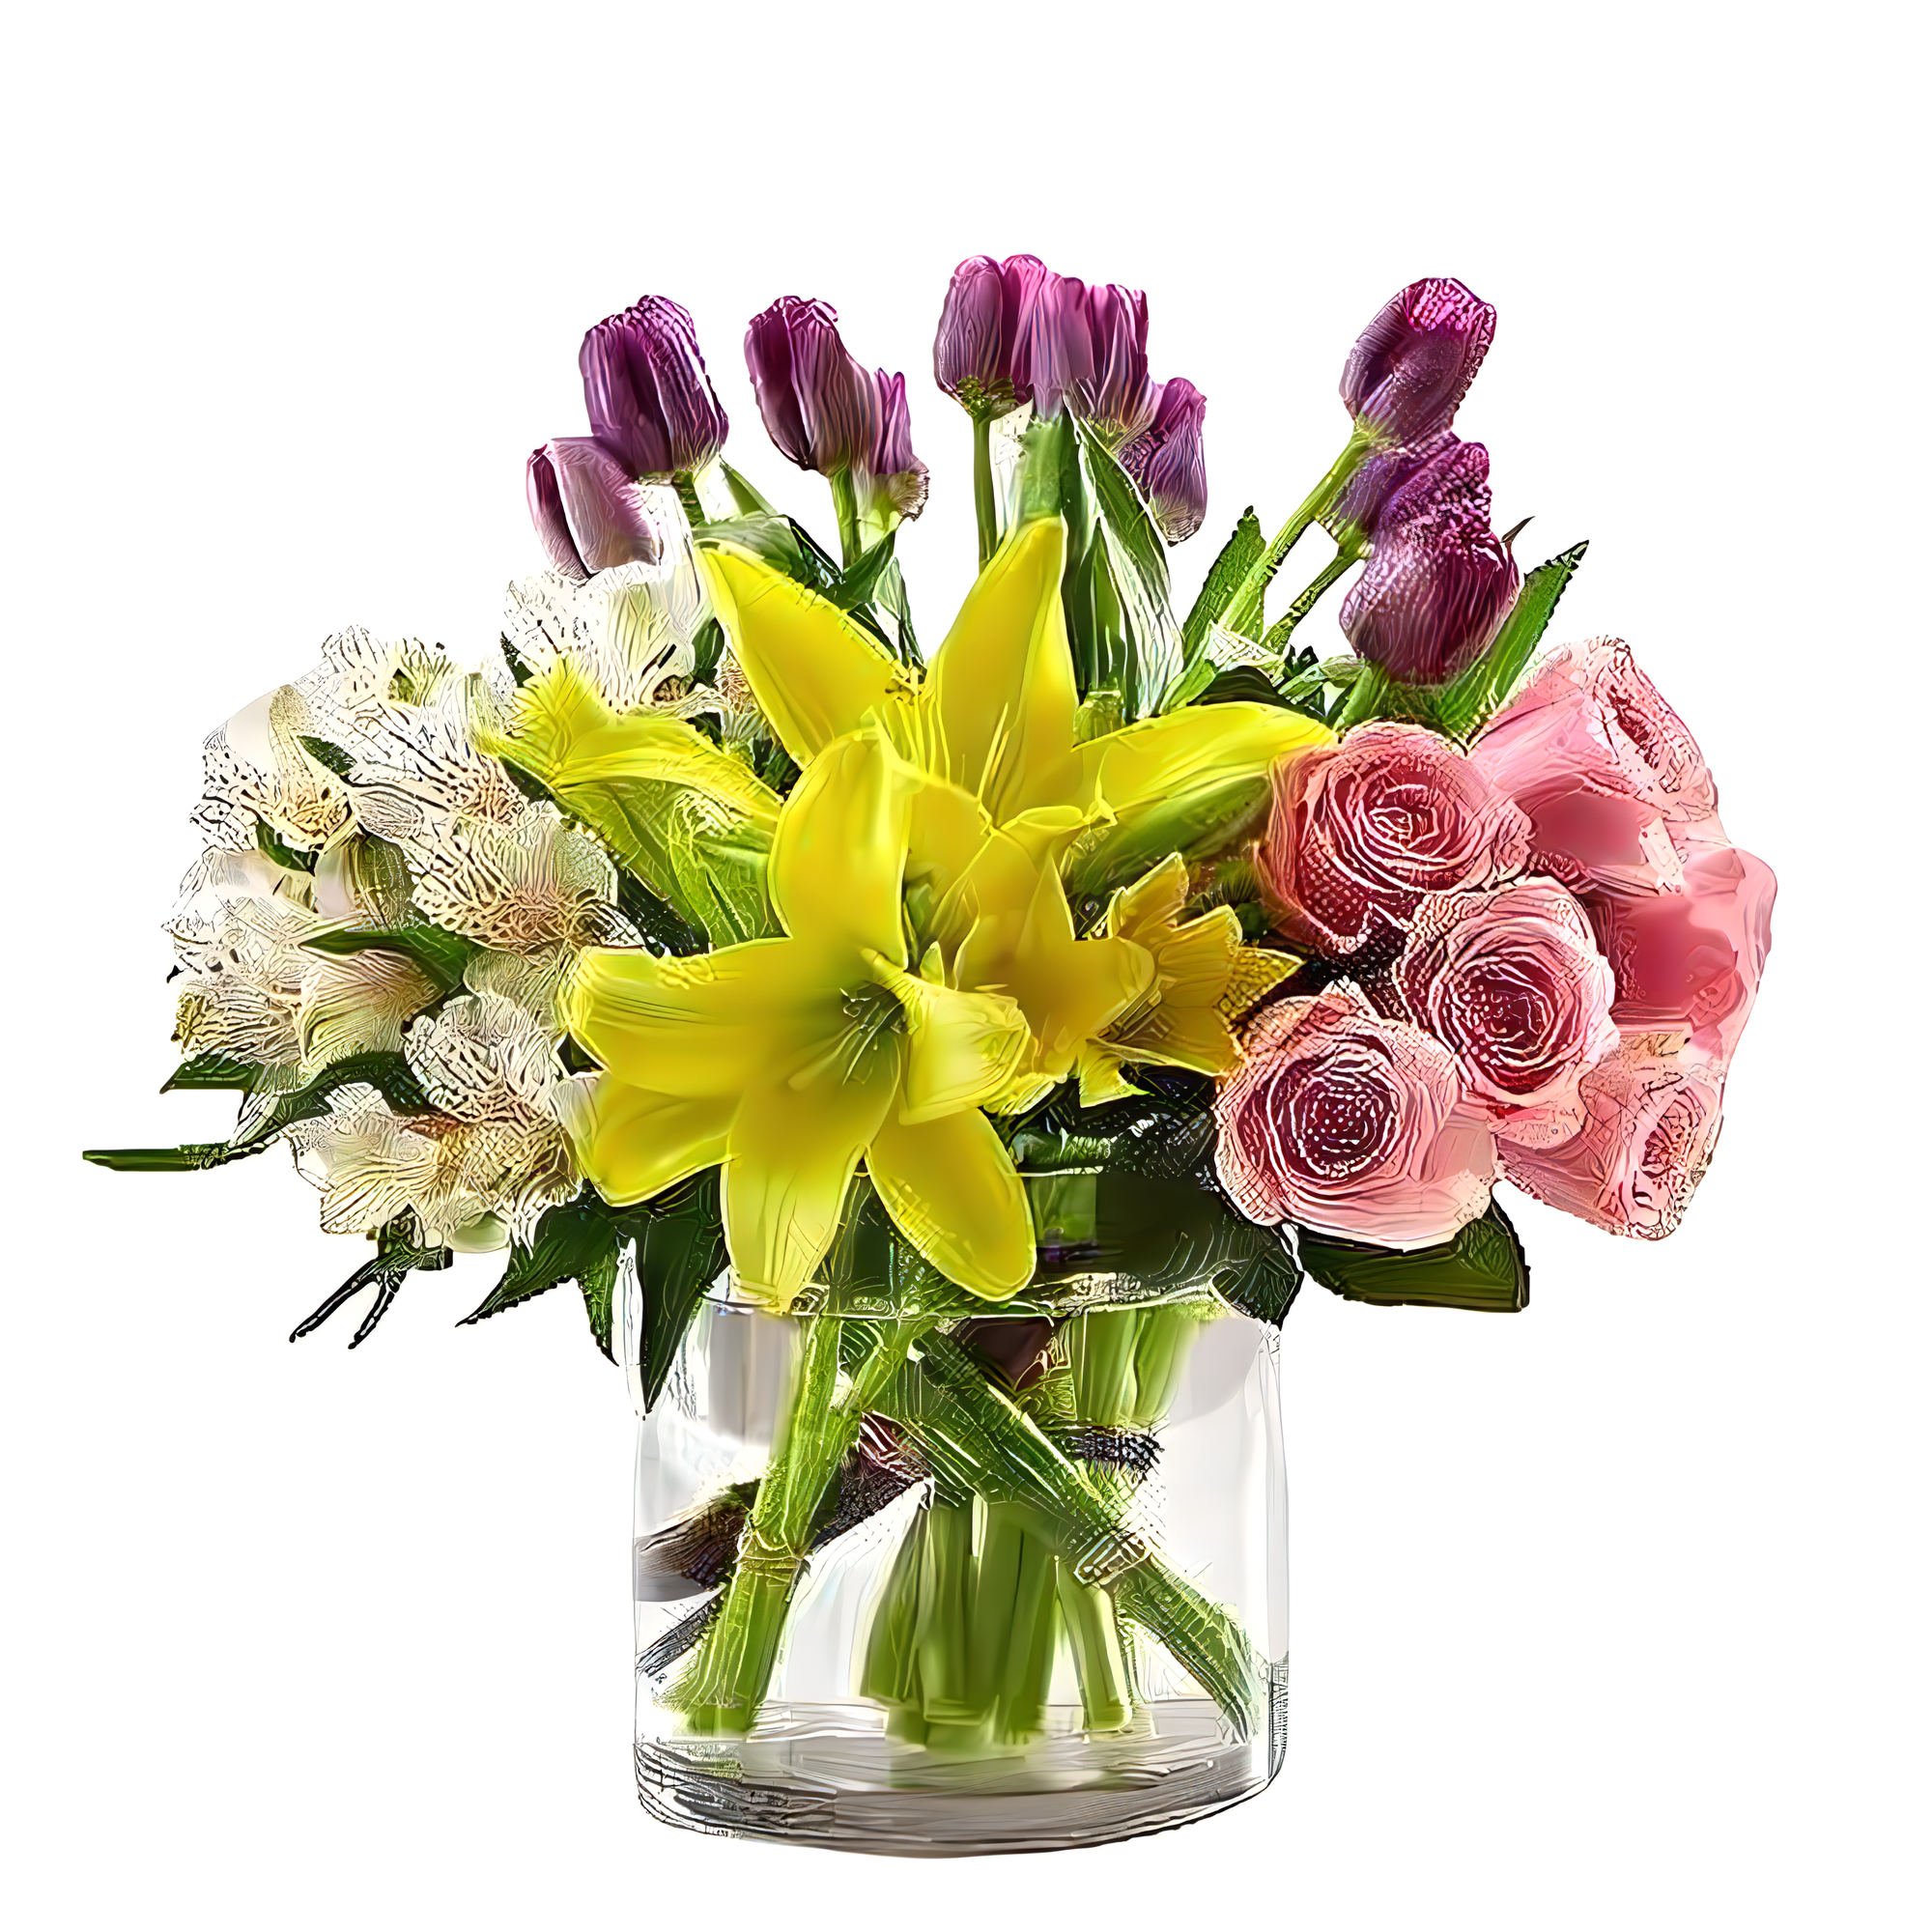 Manhattan Flower Delivery - Modern Floral Mix - Everyday Collection